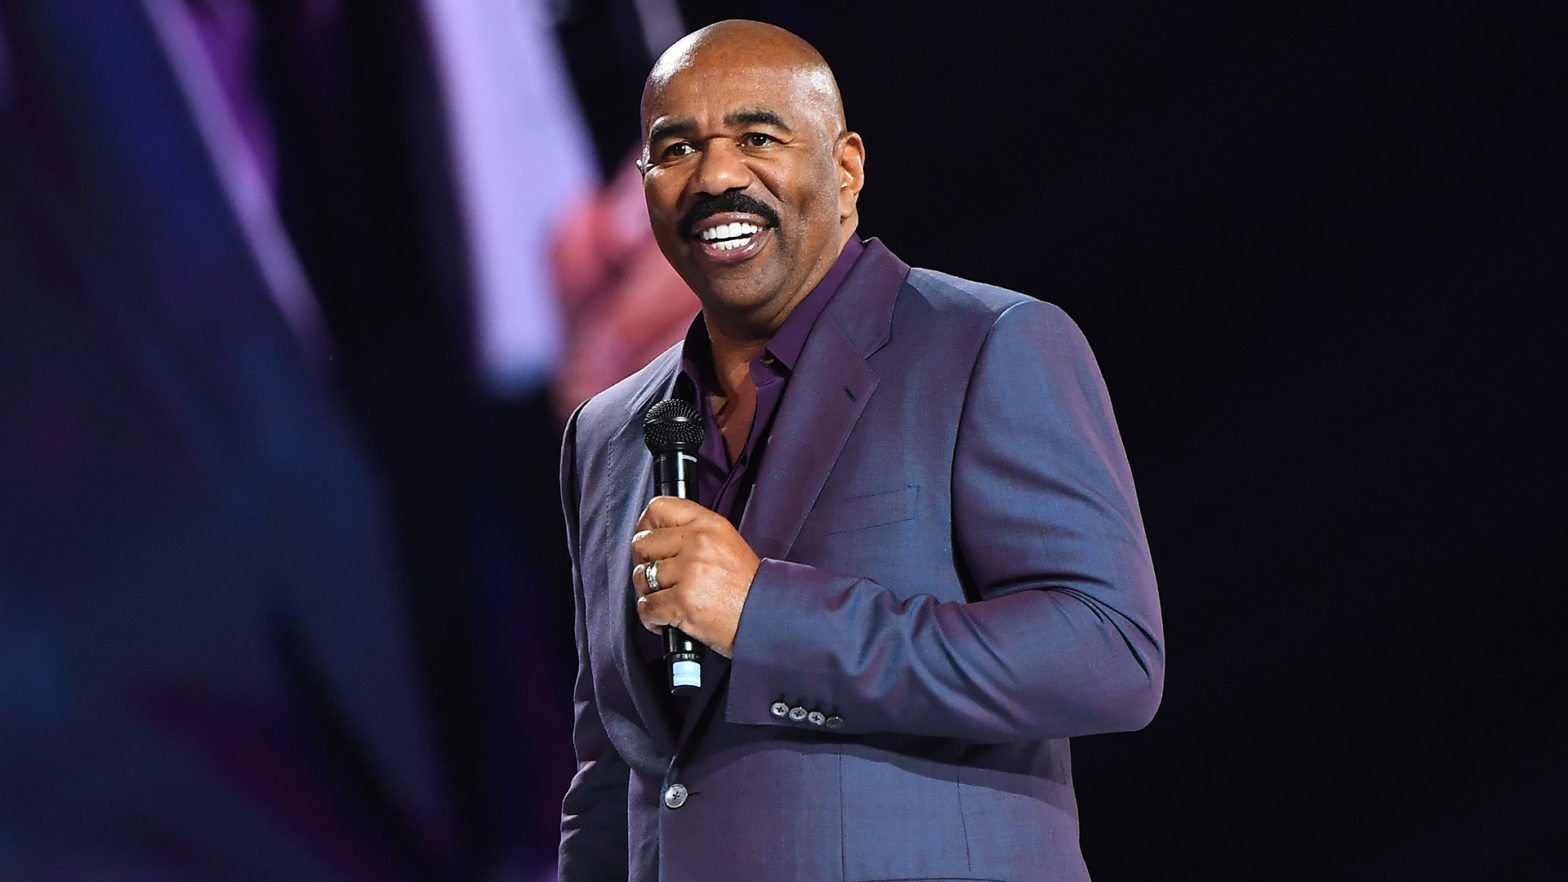 Steve Harvey Recalls Giving His Son's Friend $400K To Invest On His Behalf, 'He Gave Me Ten Times That Money In Two Years'